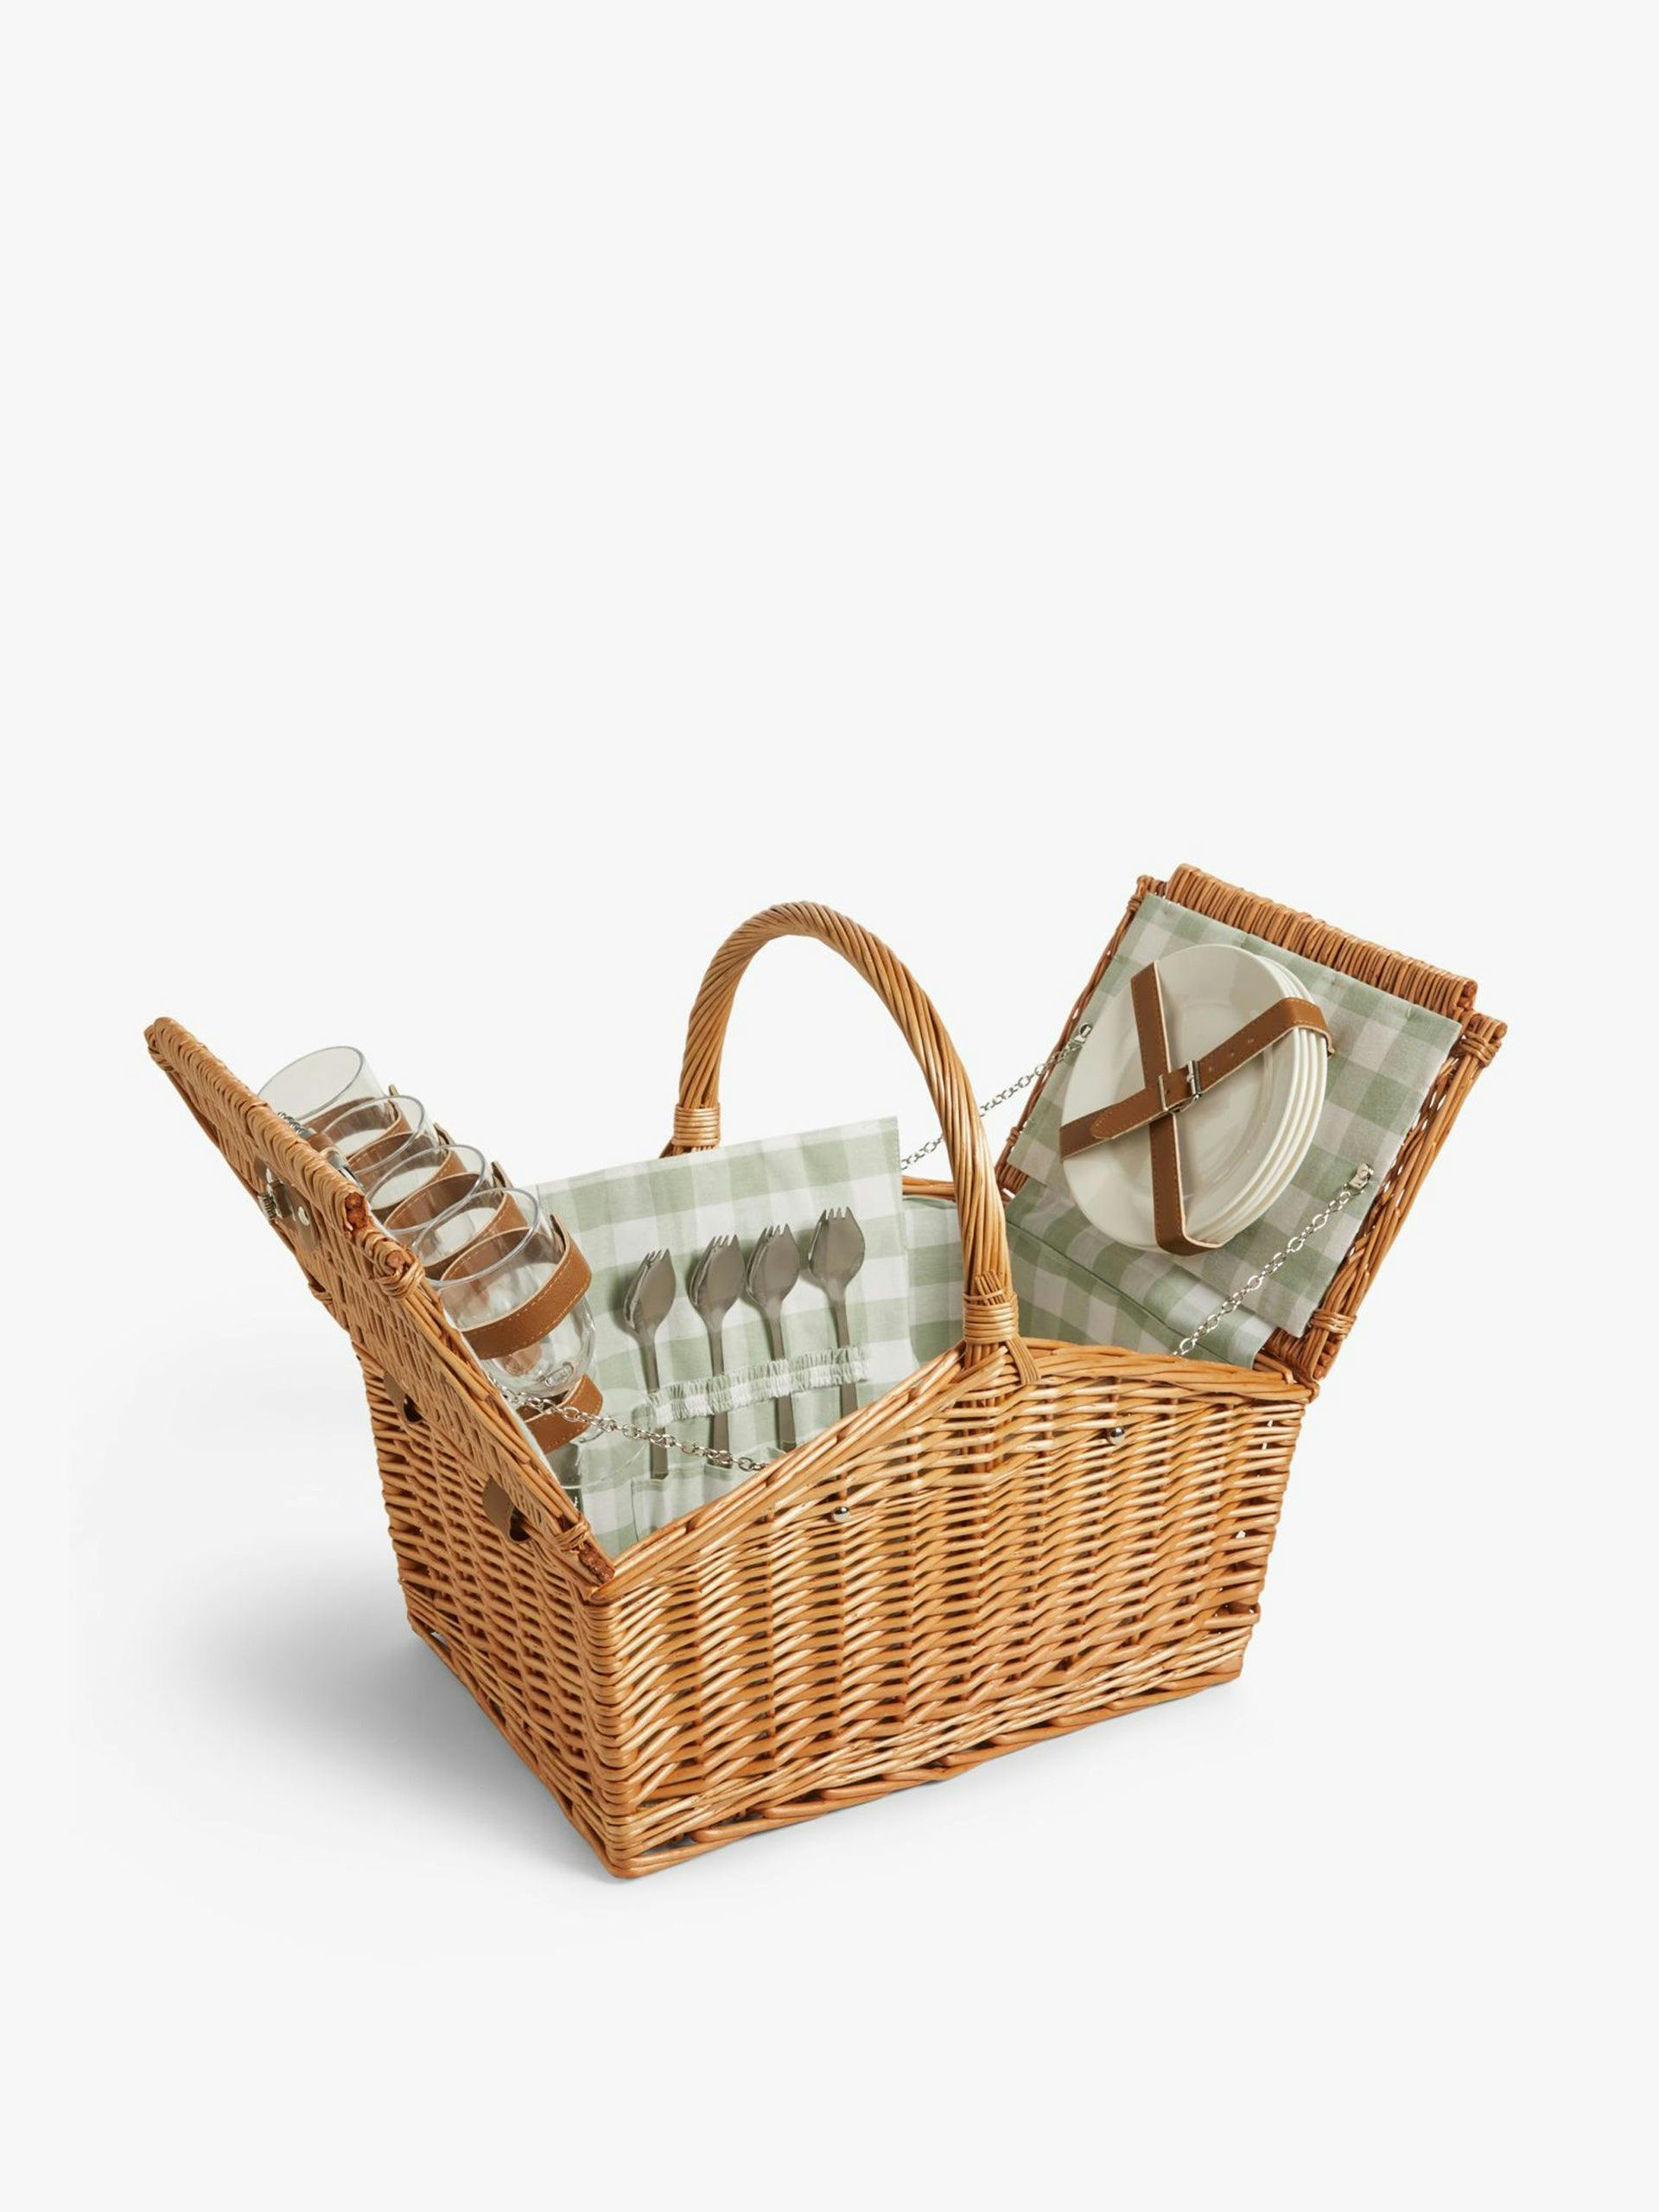 Gingham filled willow wicker picnic hamper